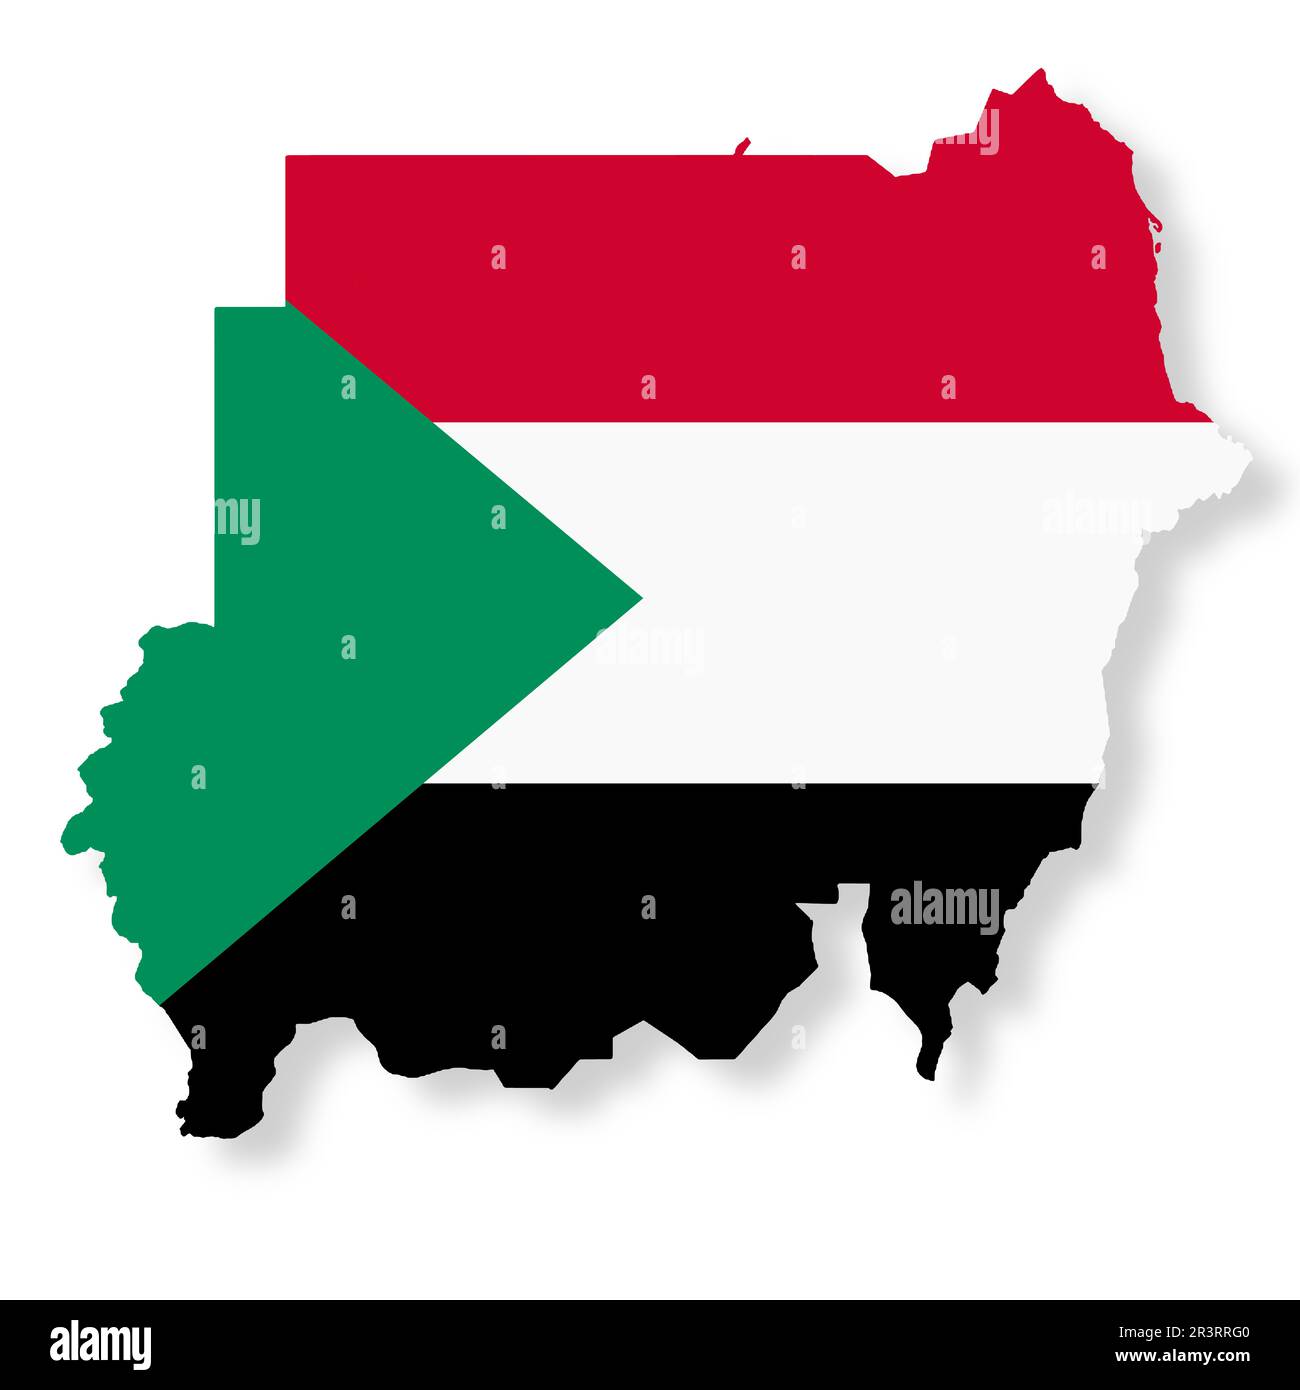 Sudan flag map with clipping path 3d illustration Stock Photo